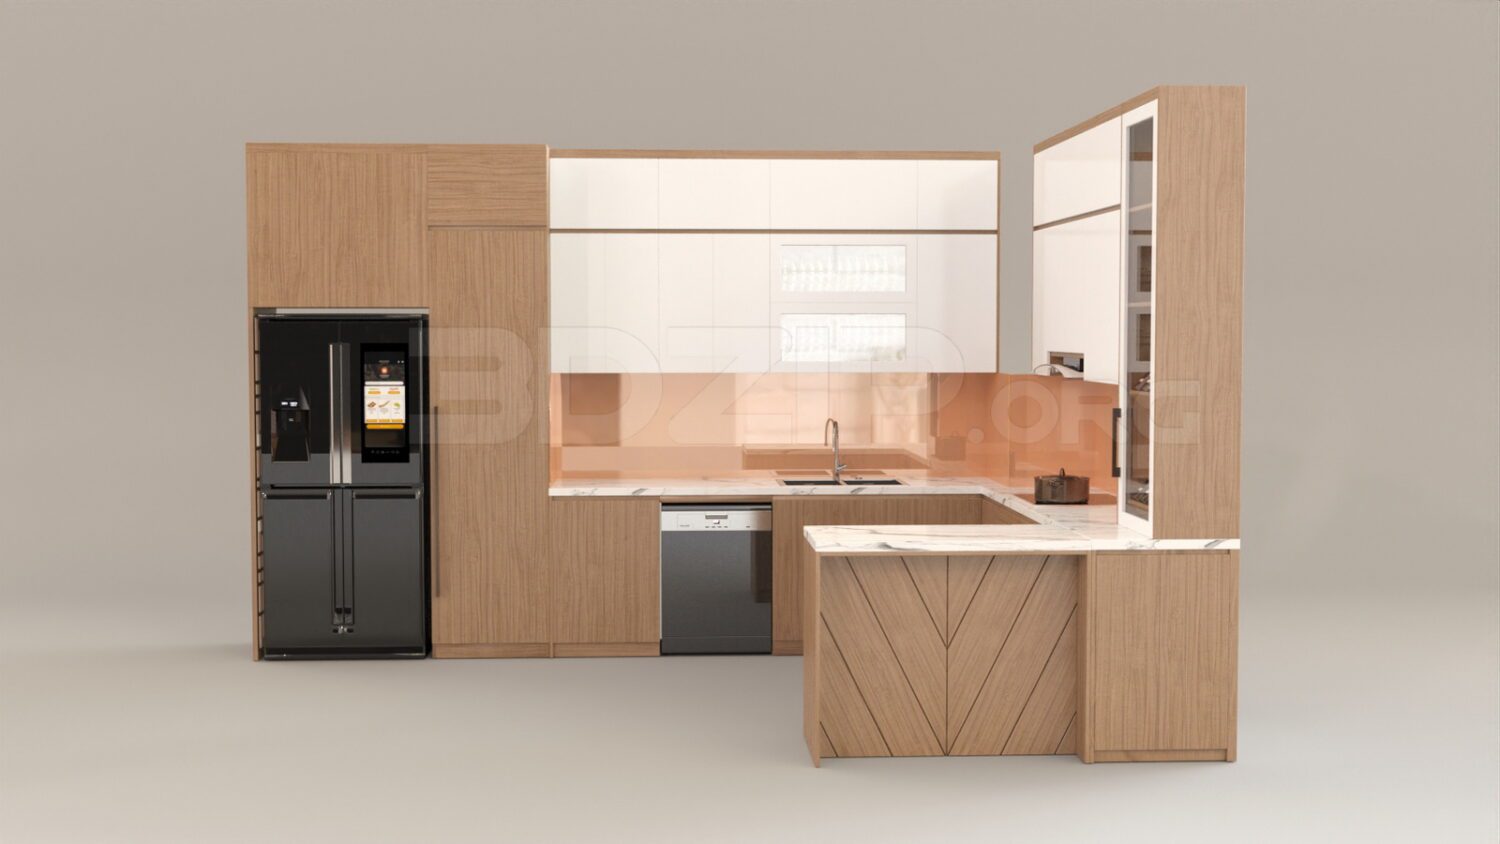 4610. Free 3D Kitchen Model Download Scaled 1 